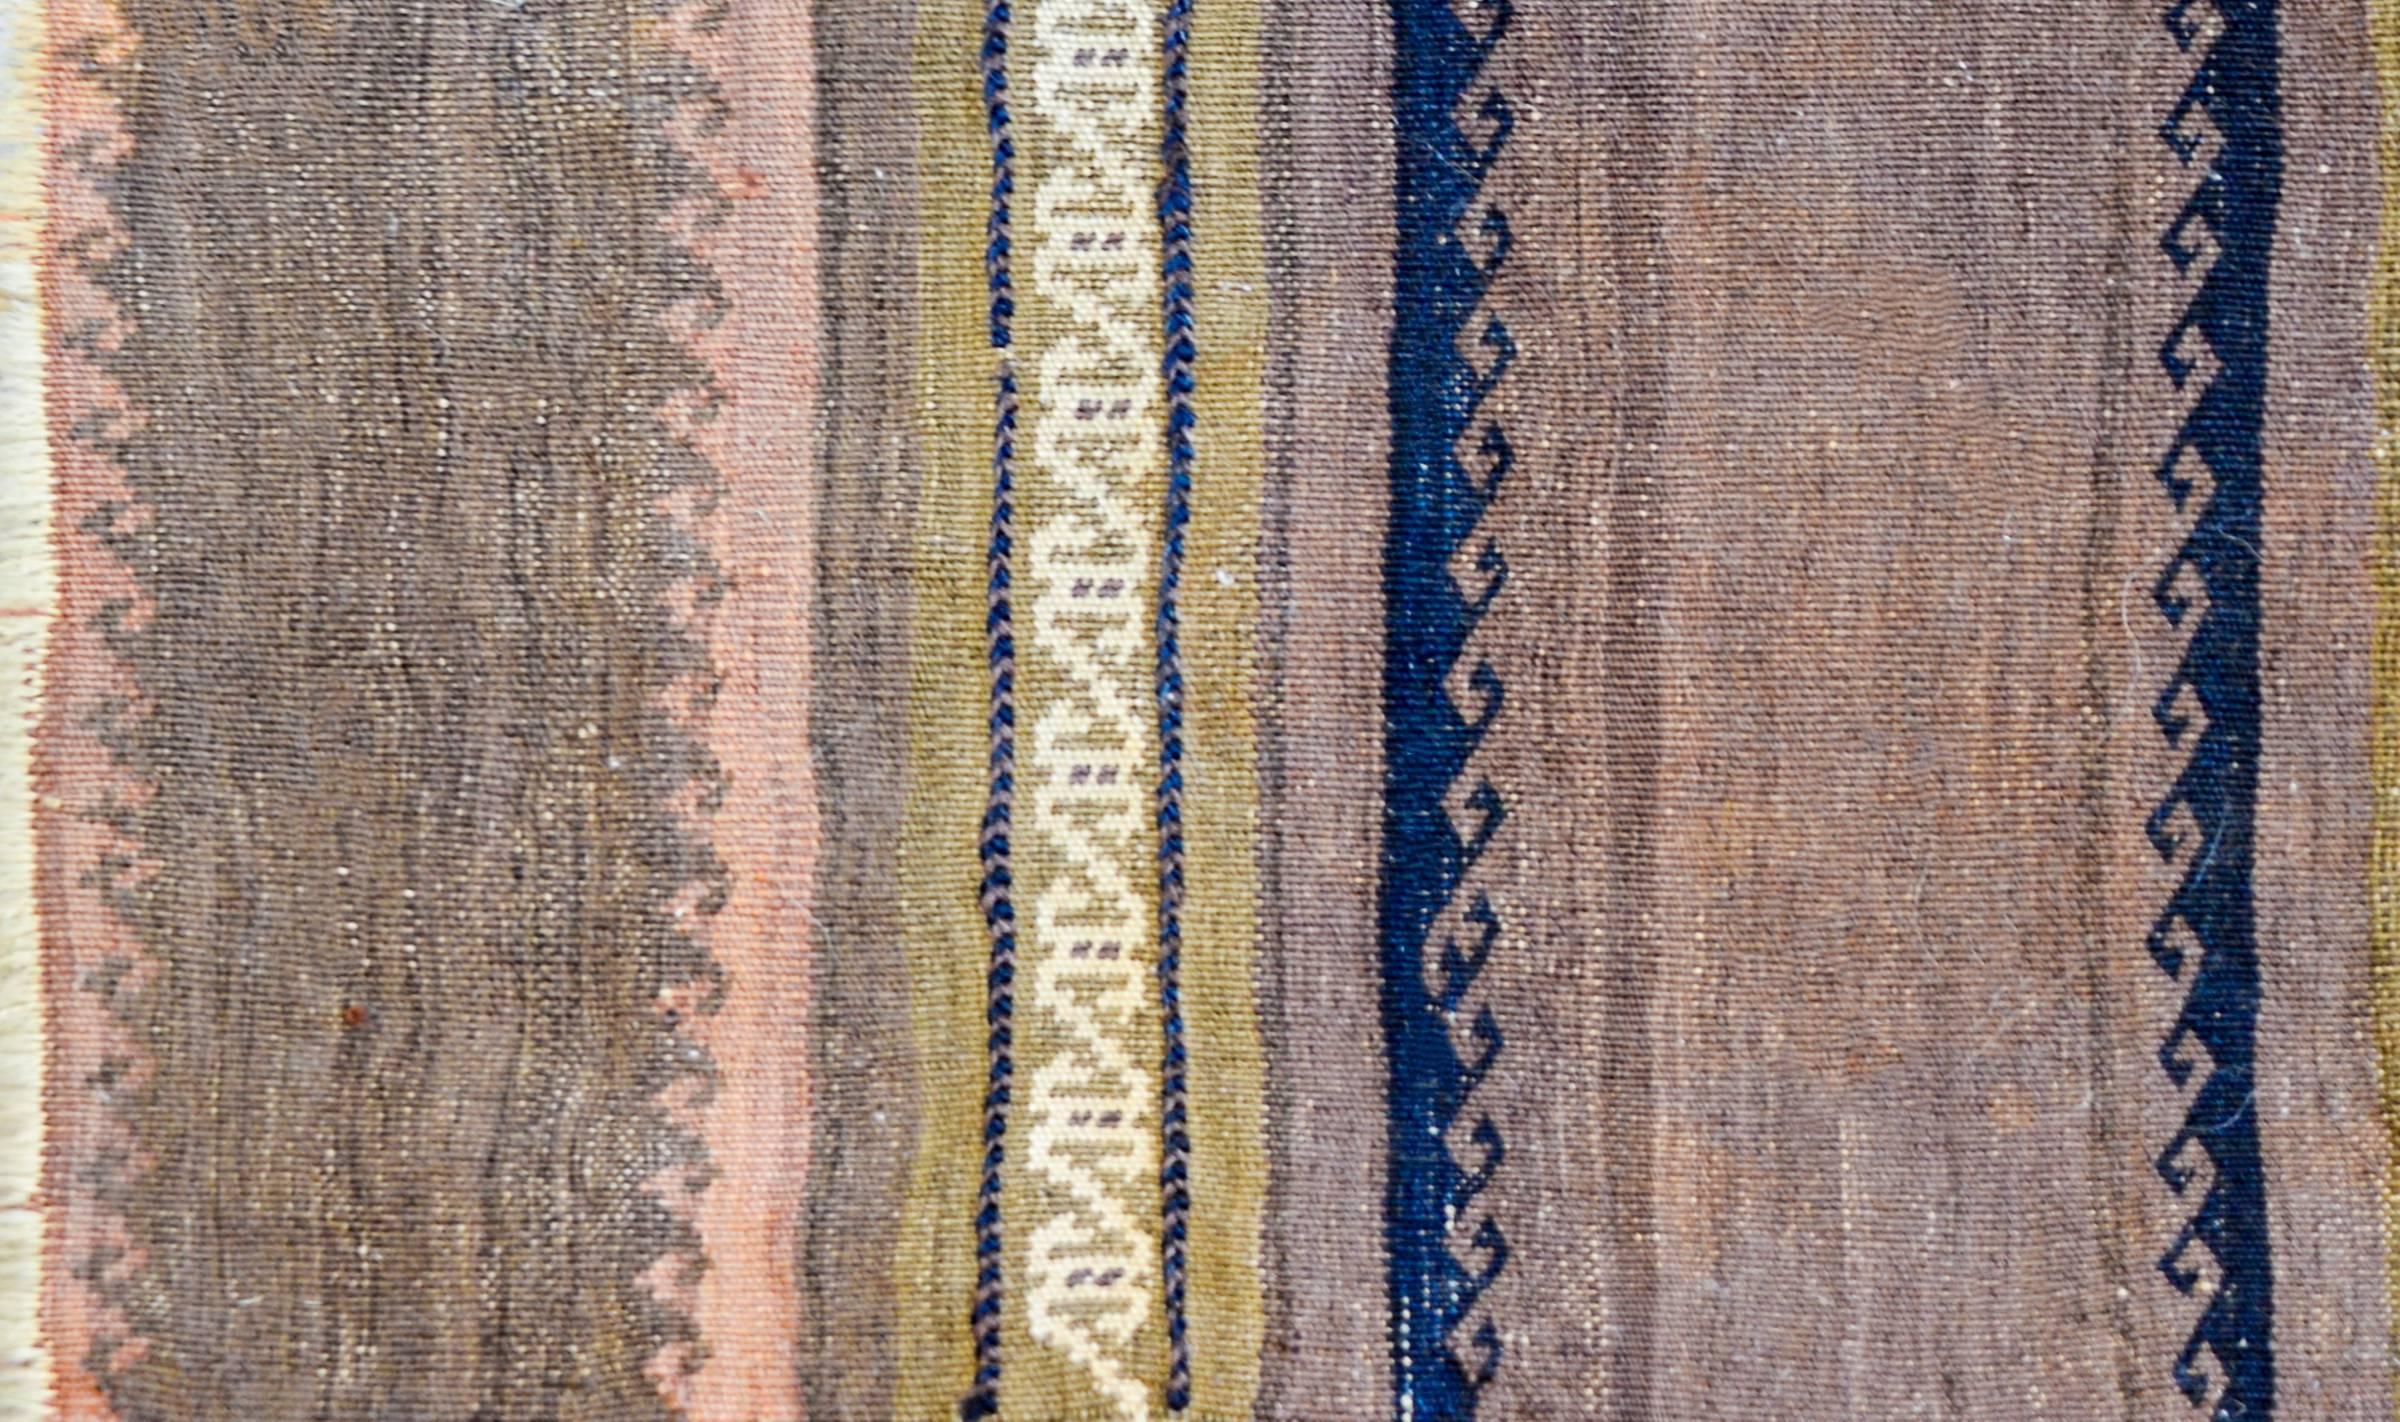 A beautiful petite early 20th century Baluch Kilim rug with a pretty pattern of pink, indigo, and pale green stripes, some with a wave pattern, and others with a stylized floral motif. The background is chic, with an abrash natural undyed brown wool